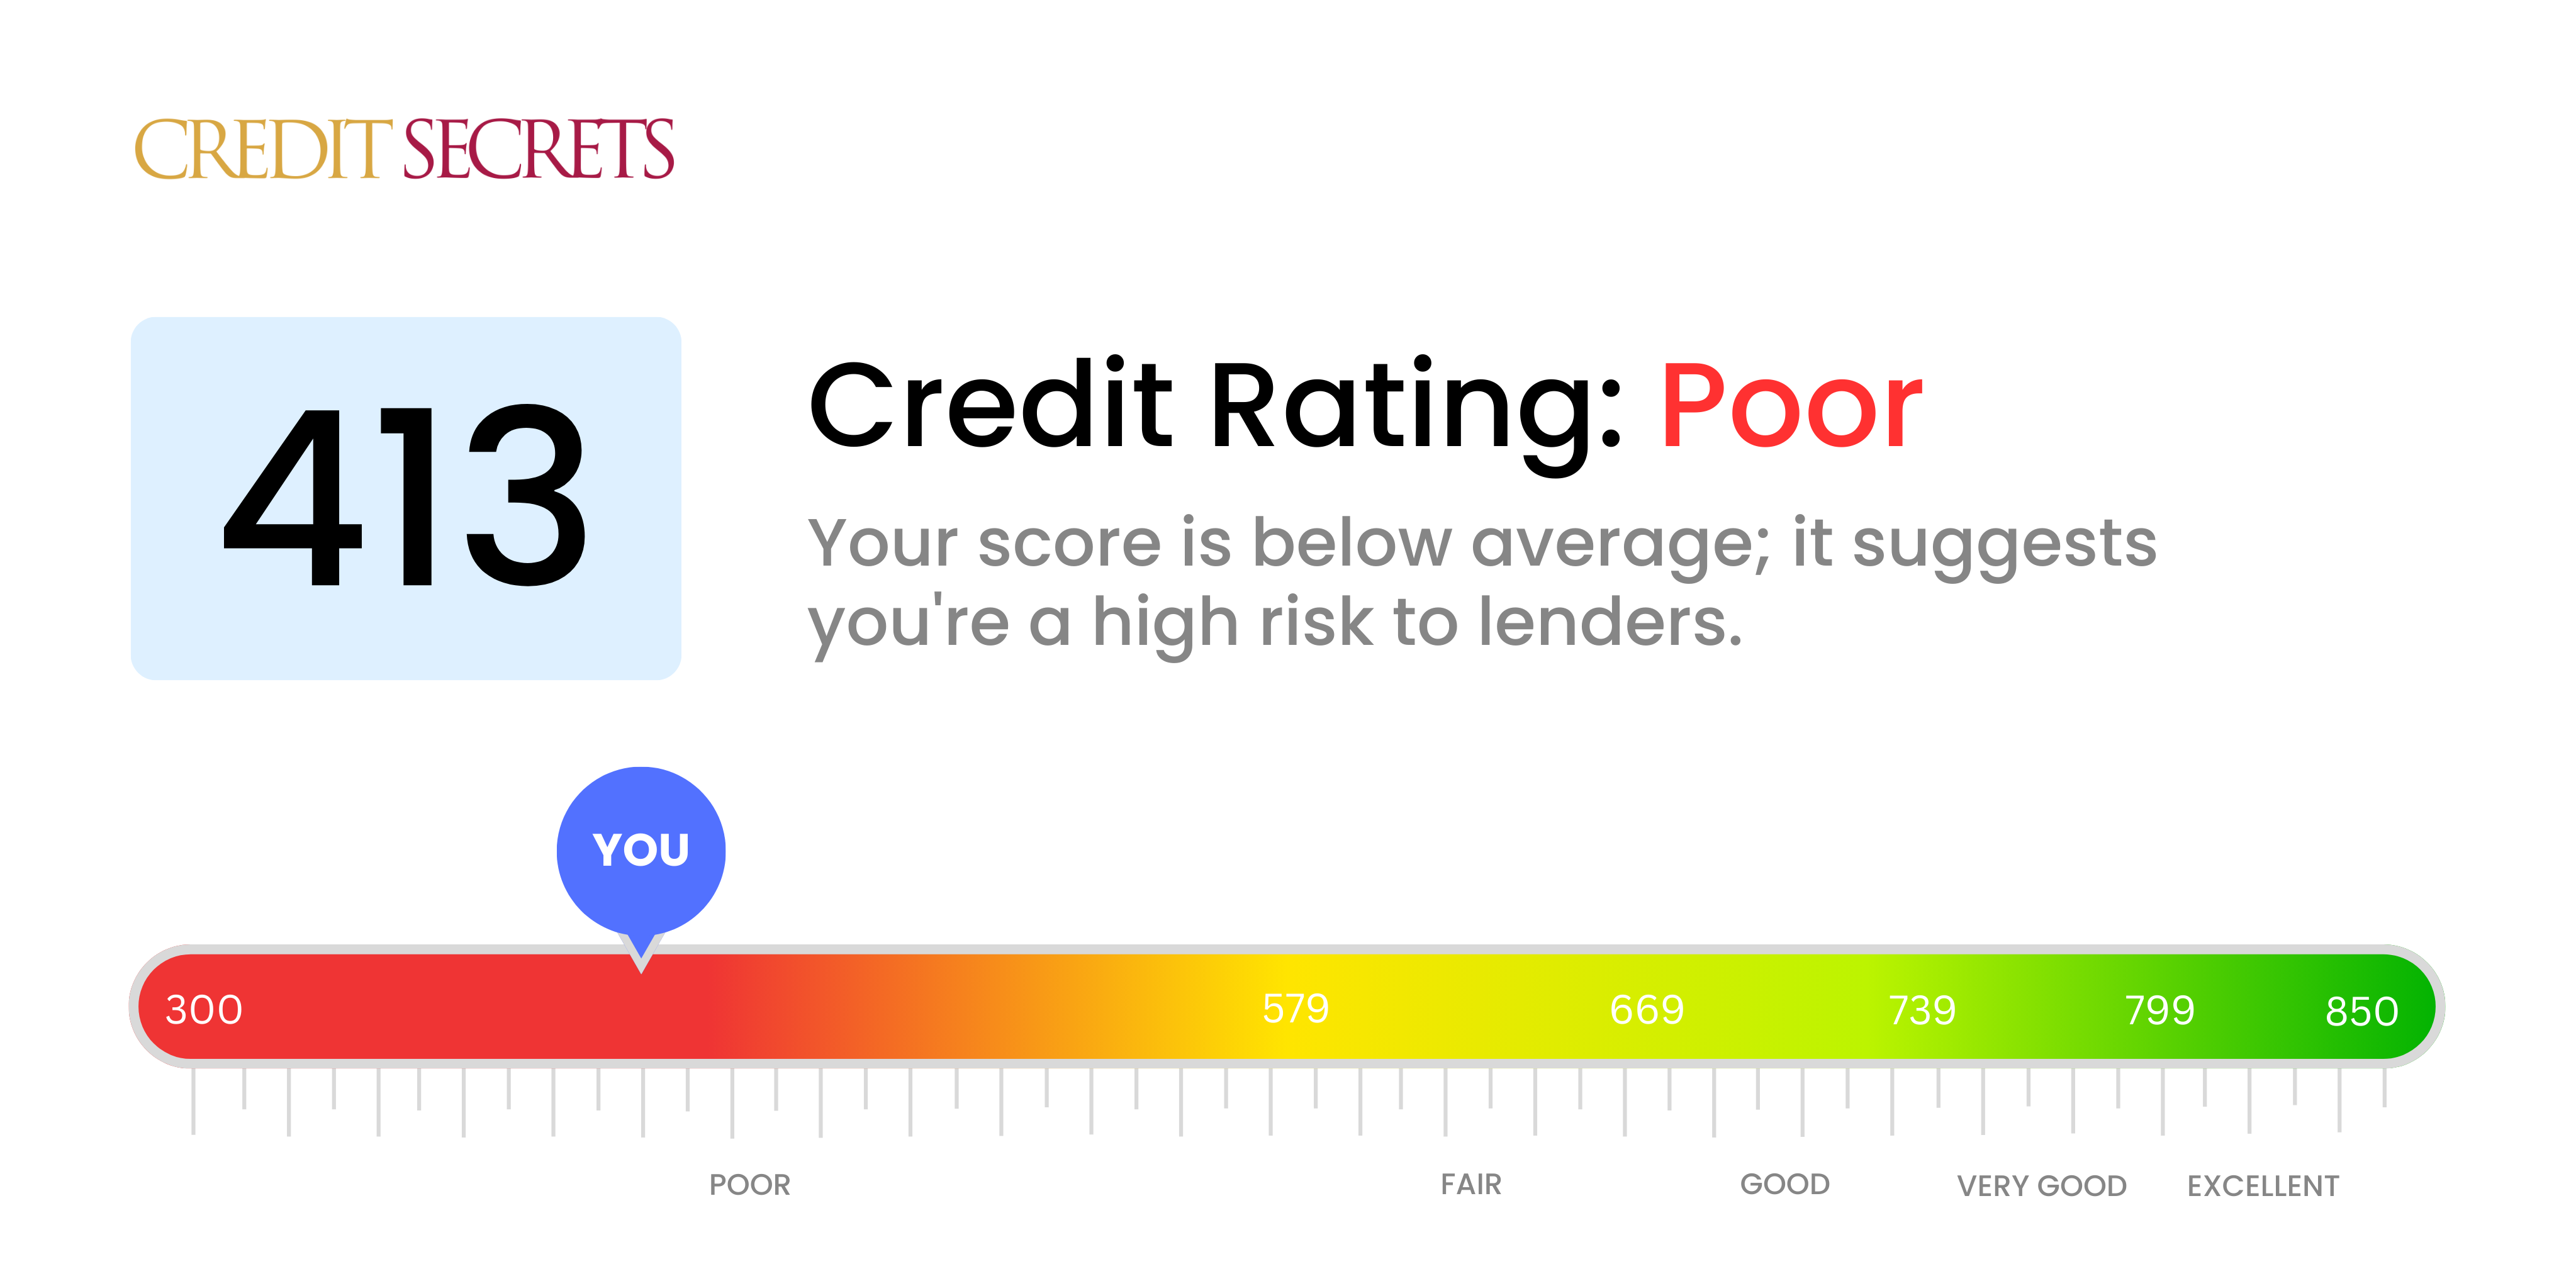 Is 413 a good credit score?